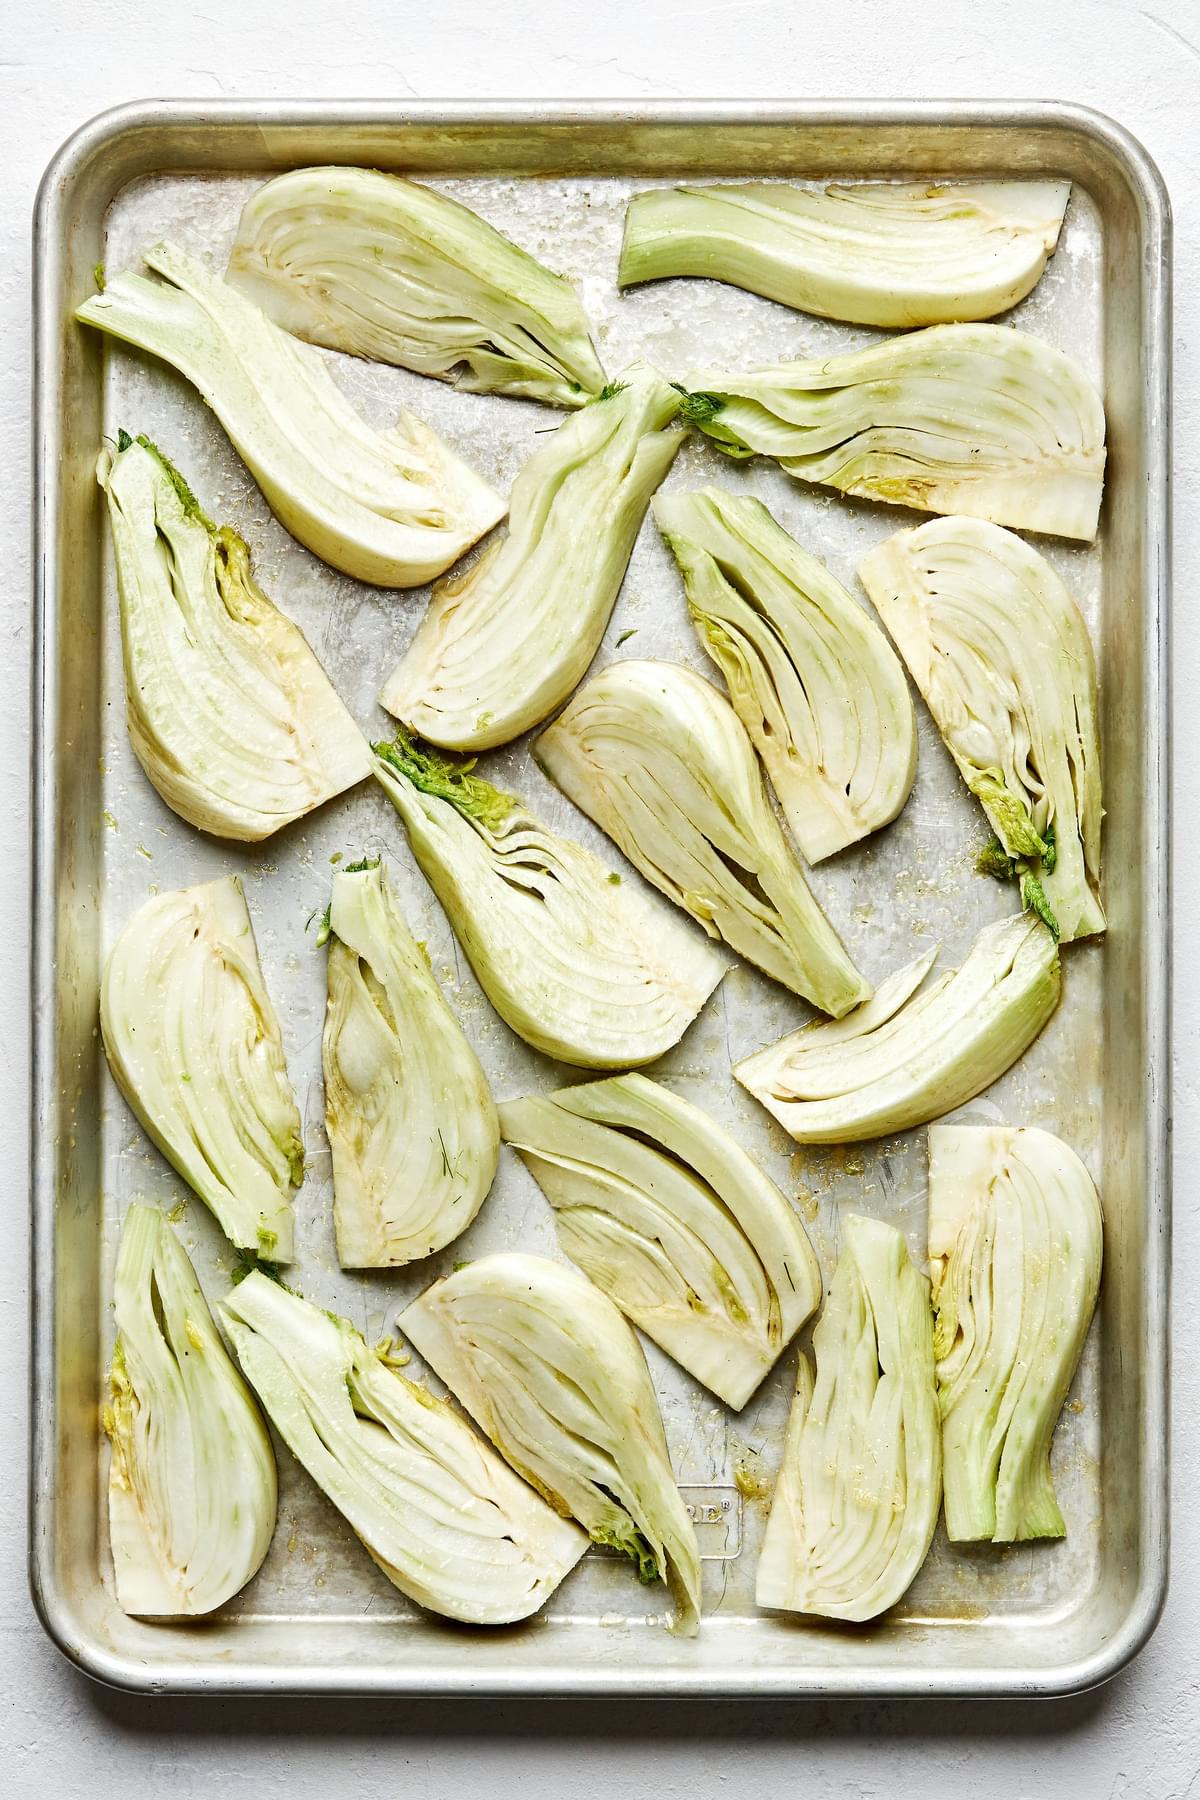 raw fennel sliced on a baking sheet tossed with olive oil, salt, garlic powder and pepper